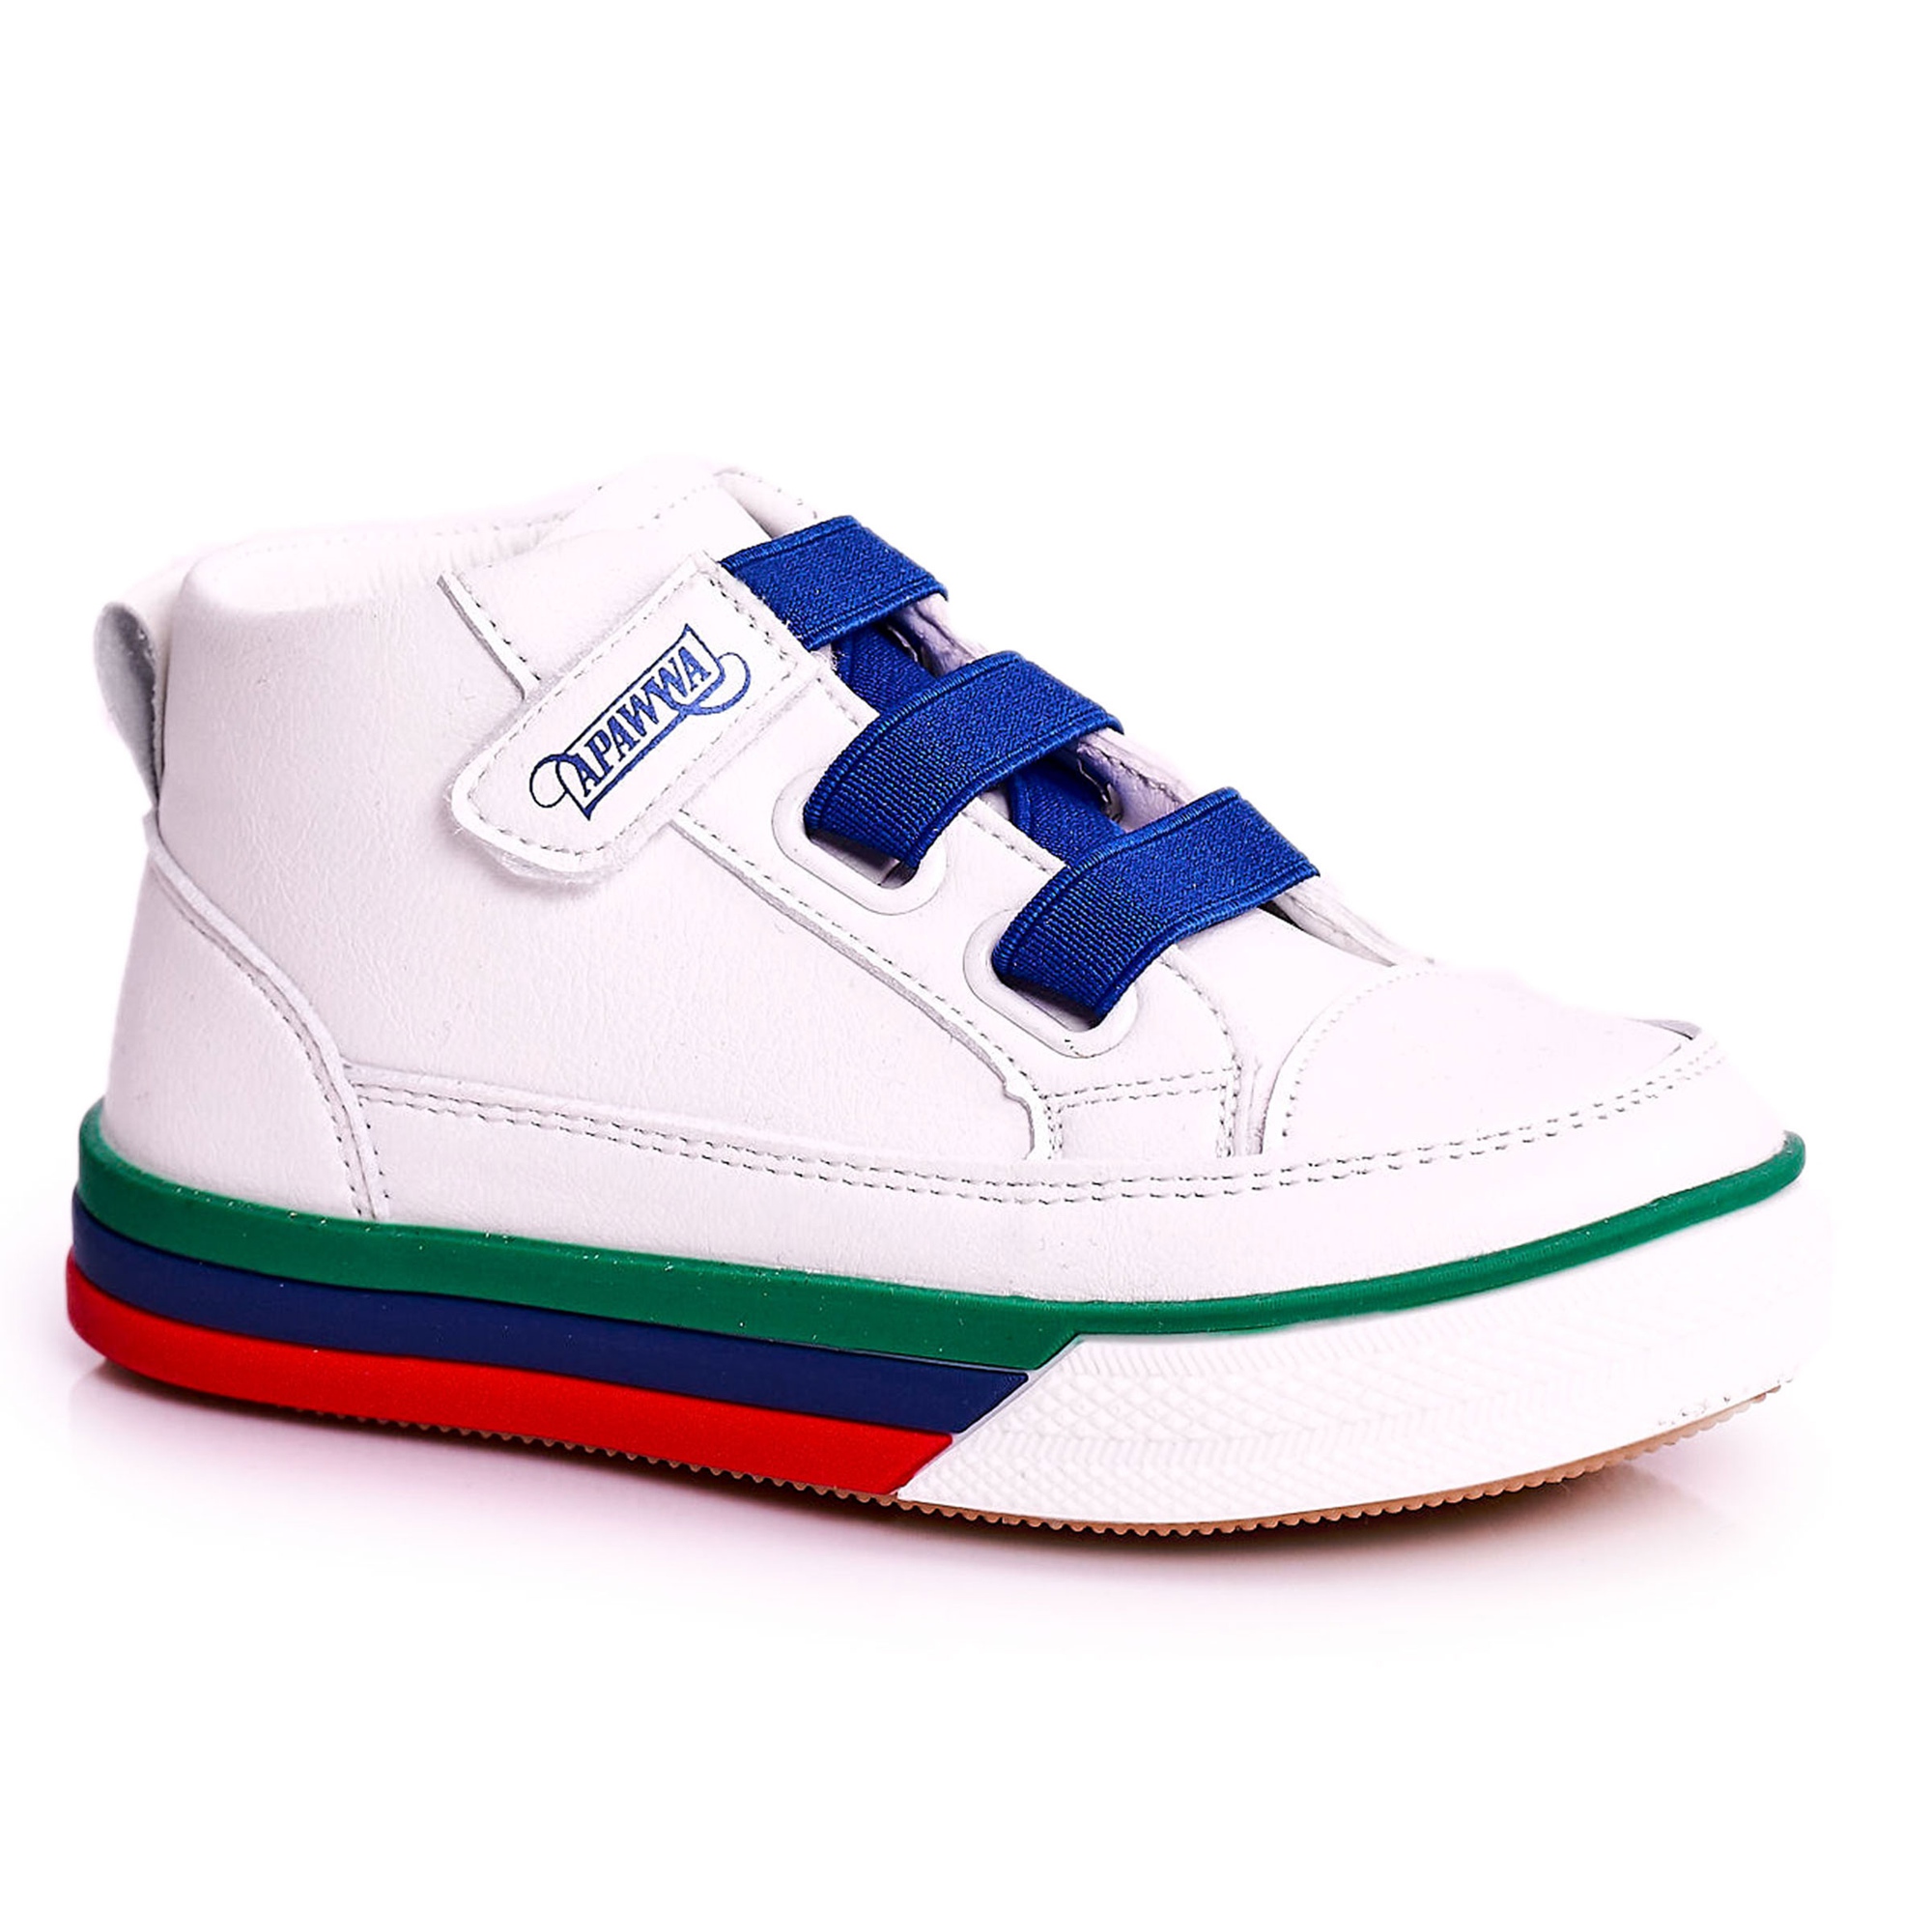 Apawwa Children's High-top Sneakers White and Navy Baxter navy blue ...